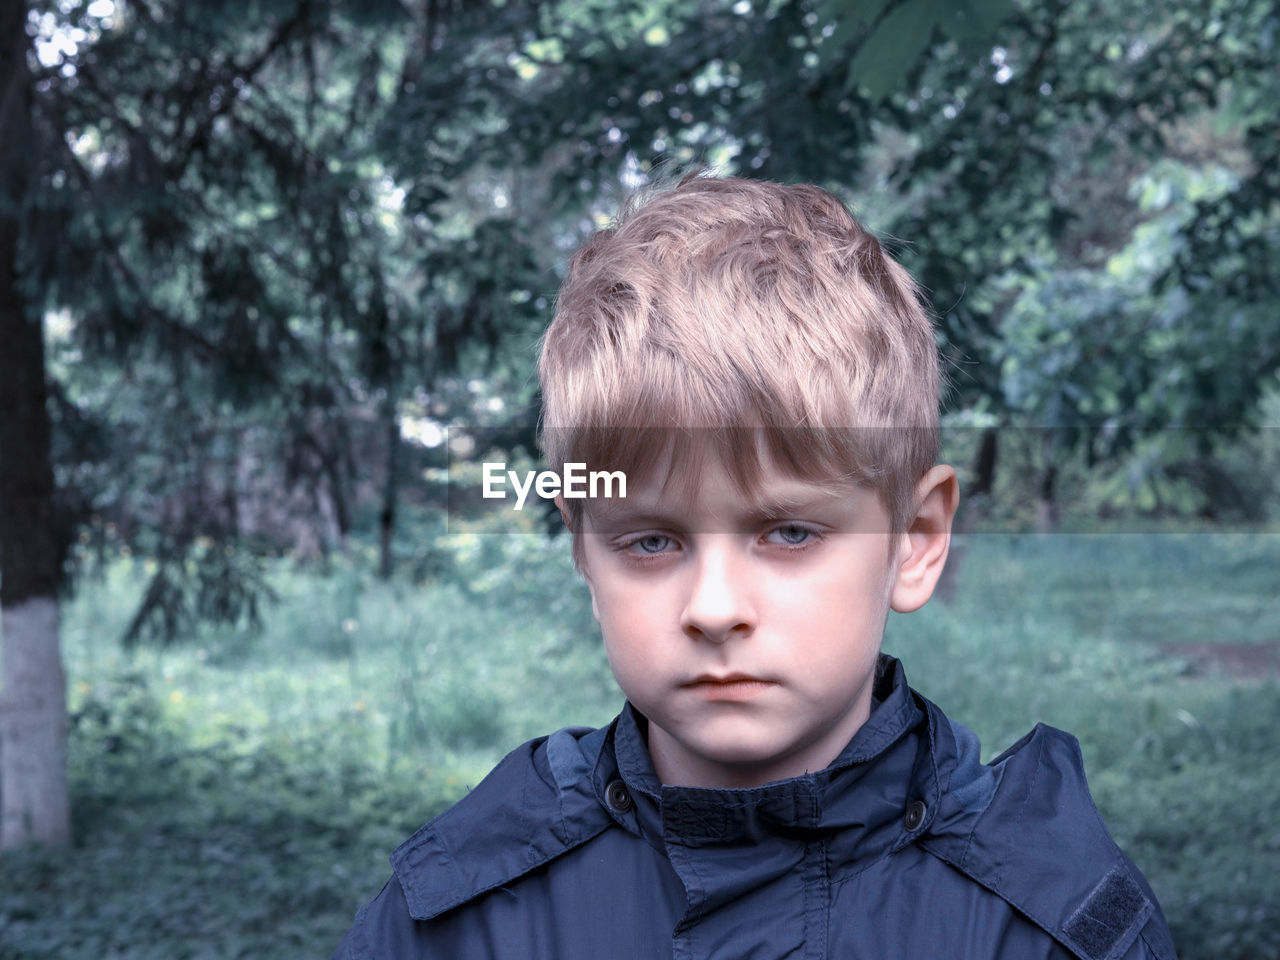 Close-up portrait of serious boy wearing raincoat in forest